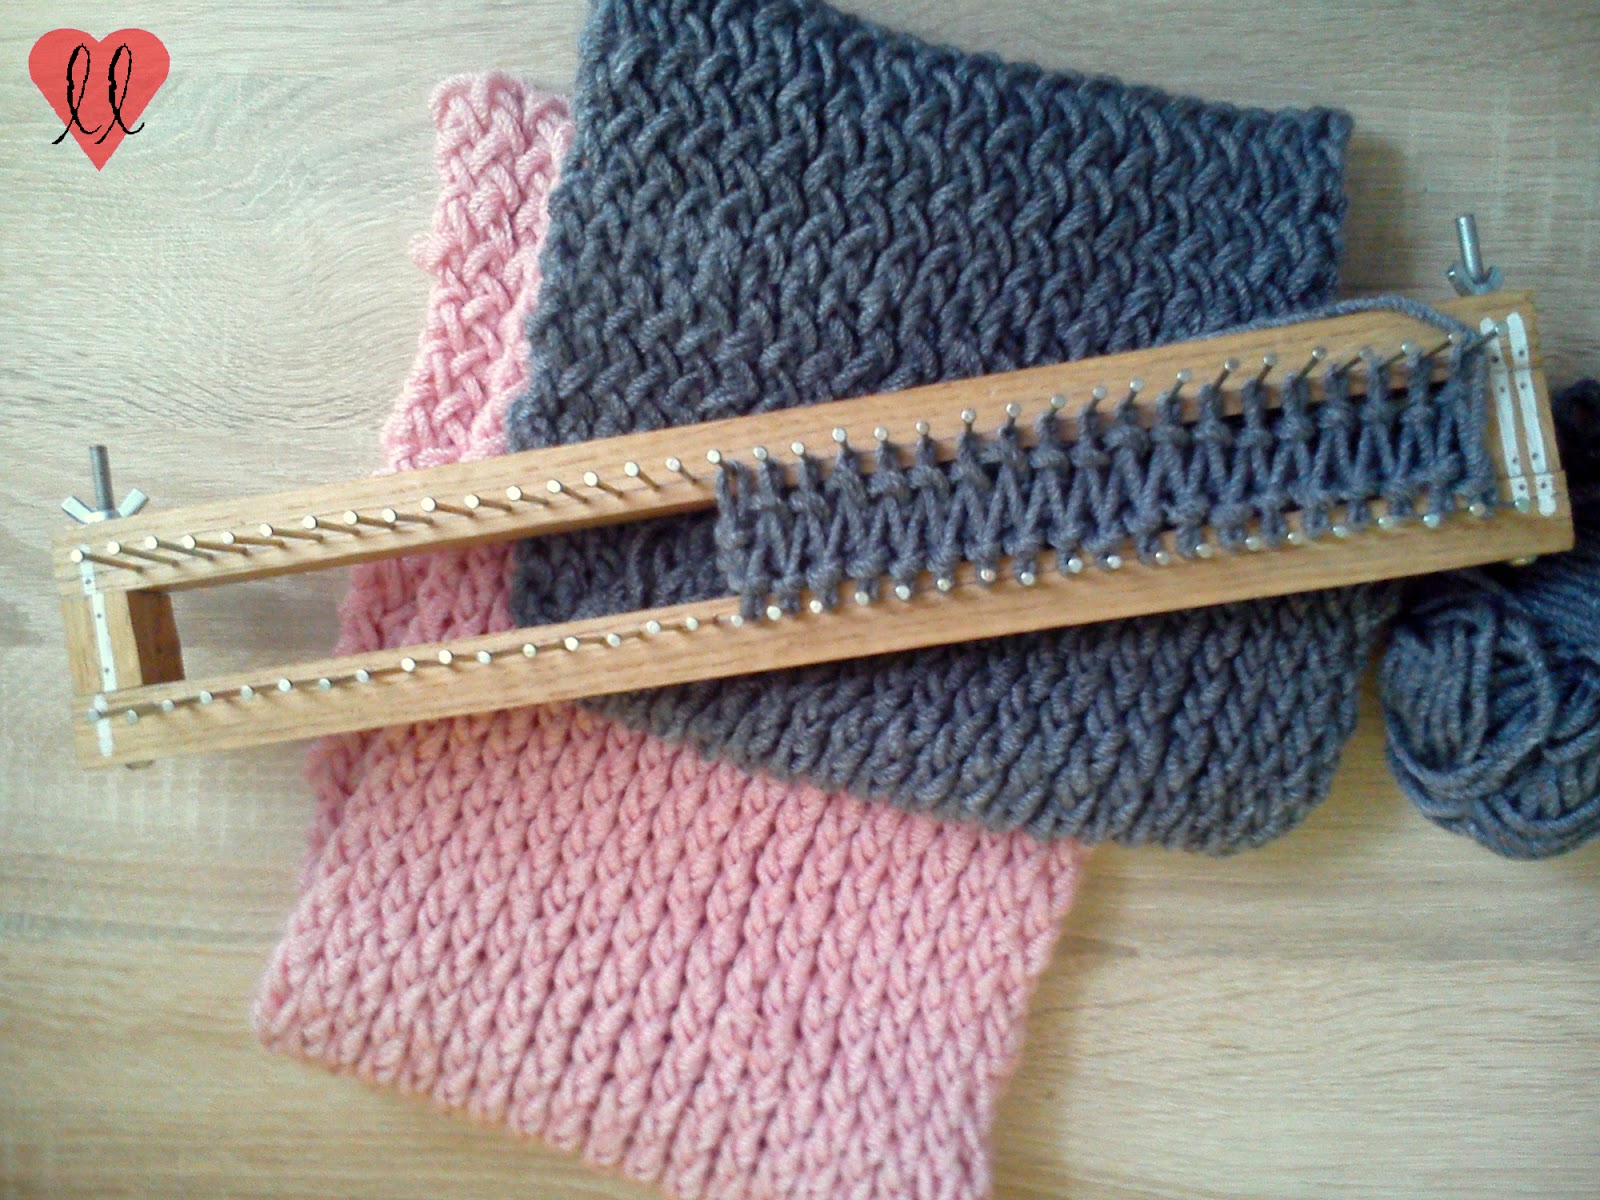 How to Loom Knit a Cabled Scarf with a rectangular loom (DIY Tutorial) 